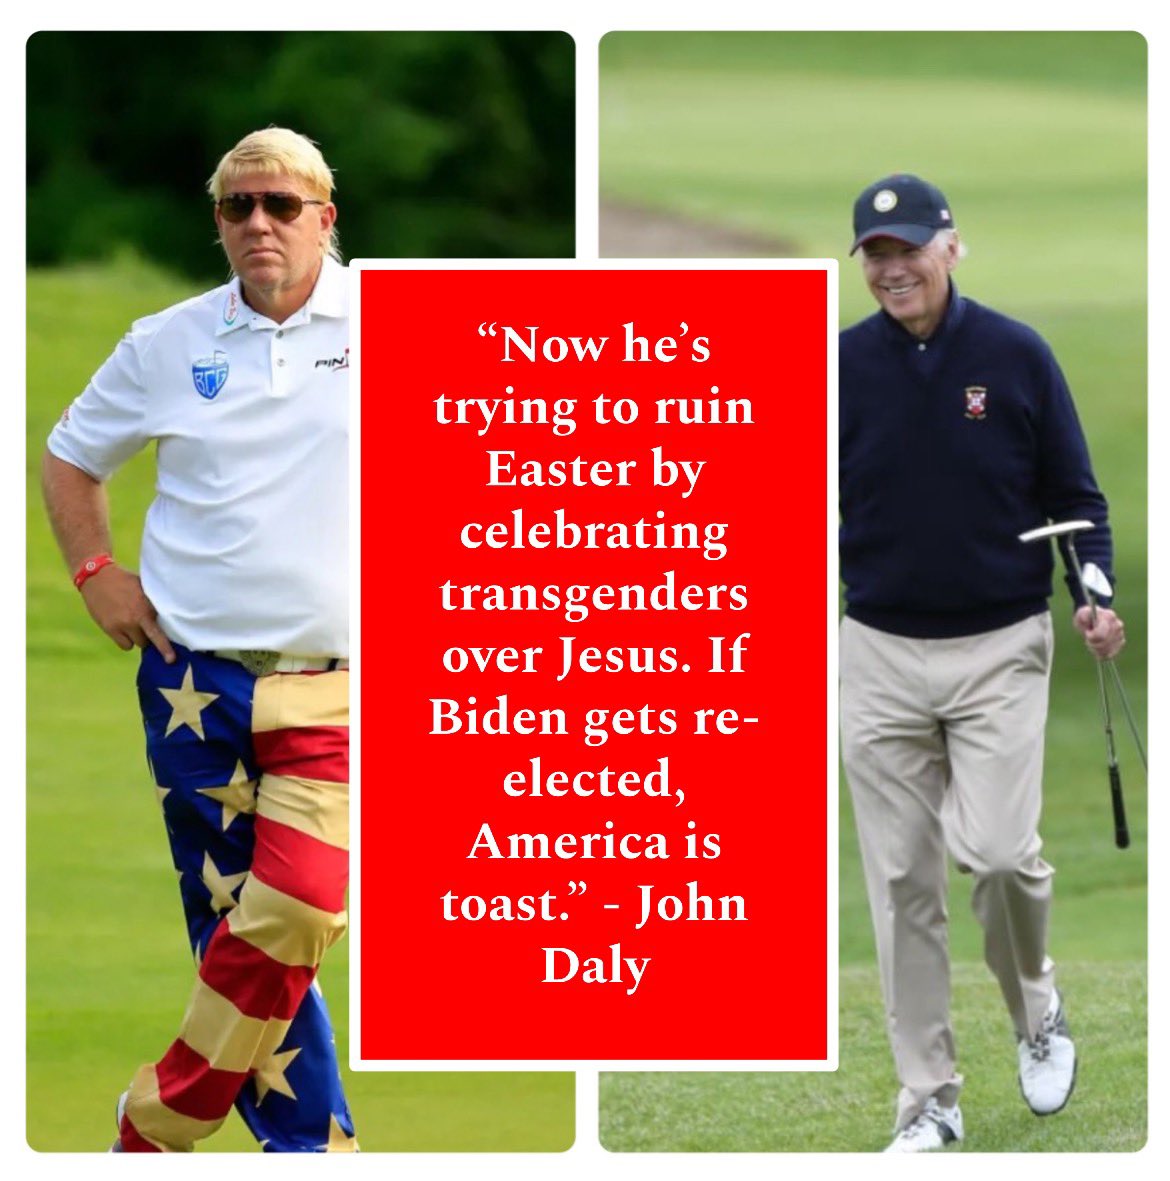 Agree or disagree with John Daly? 👀